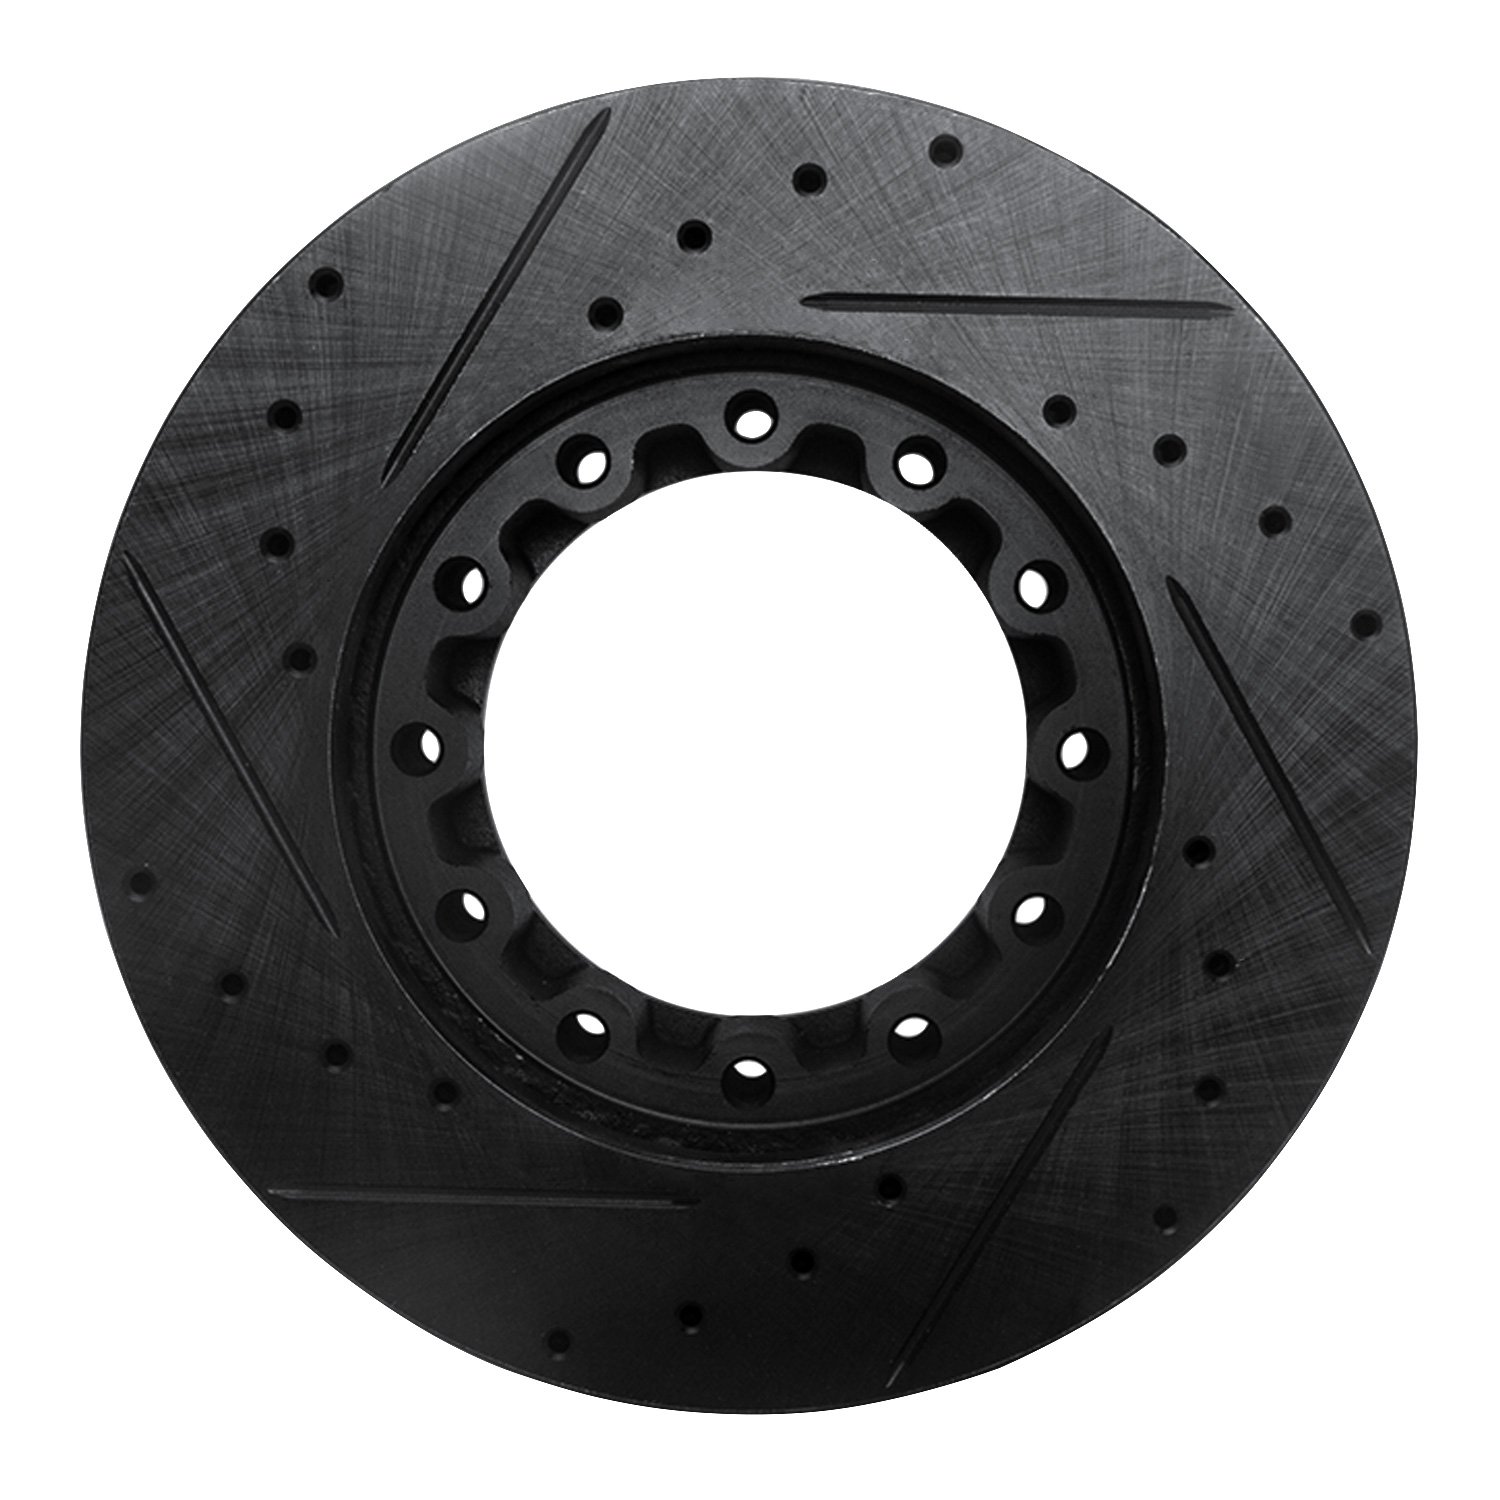 E-Line Drilled & Slotted Black Brake Rotor, 2005-2020 Fits Multiple Makes/Models, Position: Rear Right